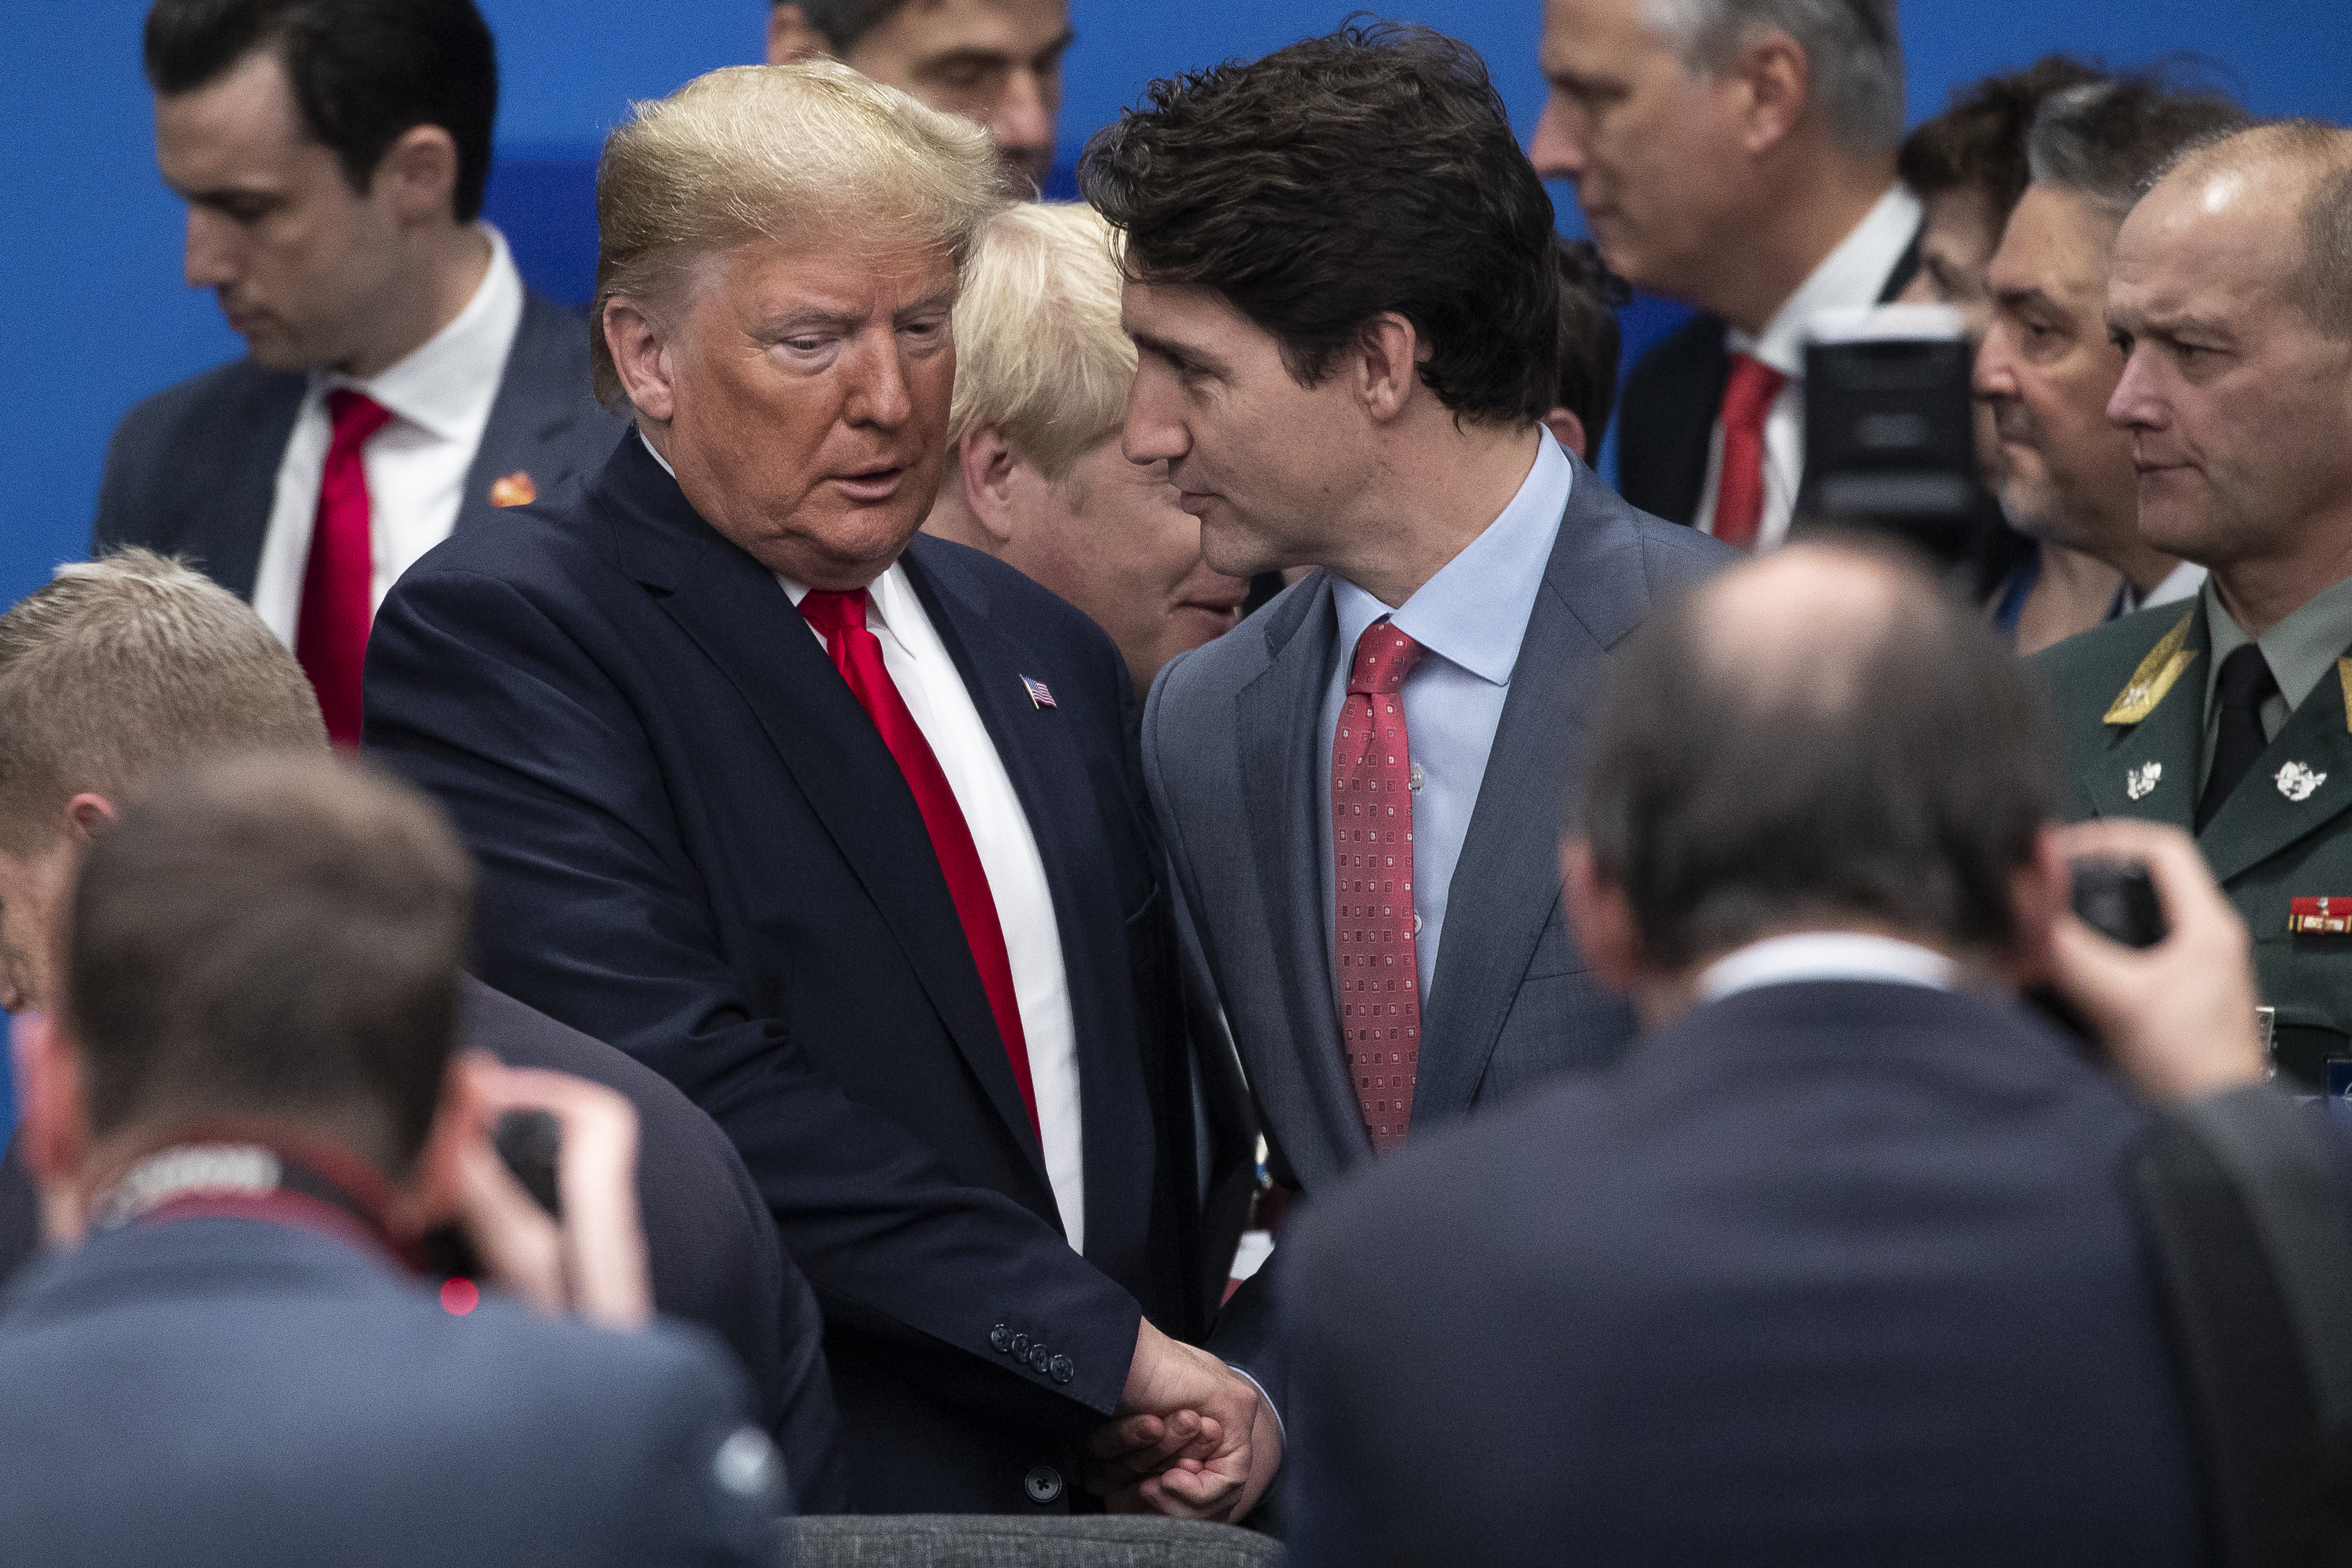 HERTFORD, ENGLAND - DECEMBER 04: U.S. President Donald Trump (L) ad Canadian Prime Minister Justin Trudeau (R) attend the NATO summit at the Grove Hotel on December 4, 2019 in Watford, England. France and the UK signed the Treaty of Dunkirk in 1947 in the aftermath of WW2 cementing a mutual alliance in the event of an attack by Germany or the Soviet Union. The Benelux countries joined the Treaty and in April 1949 expanded further to include North America and Canada followed by Portugal, Italy, Norway, Denmark and Iceland. This new military alliance became the North Atlantic Treaty Organisation (NATO). The organisation grew with Greece and Turkey becoming members and a re-armed West Germany was permitted in 1955. This encouraged the creation of the Soviet-led Warsaw Pact delineating the two sides of the Cold War. This year marks the 70th anniversary of NATO. (Photo by Dan Kitwood/Getty Images)